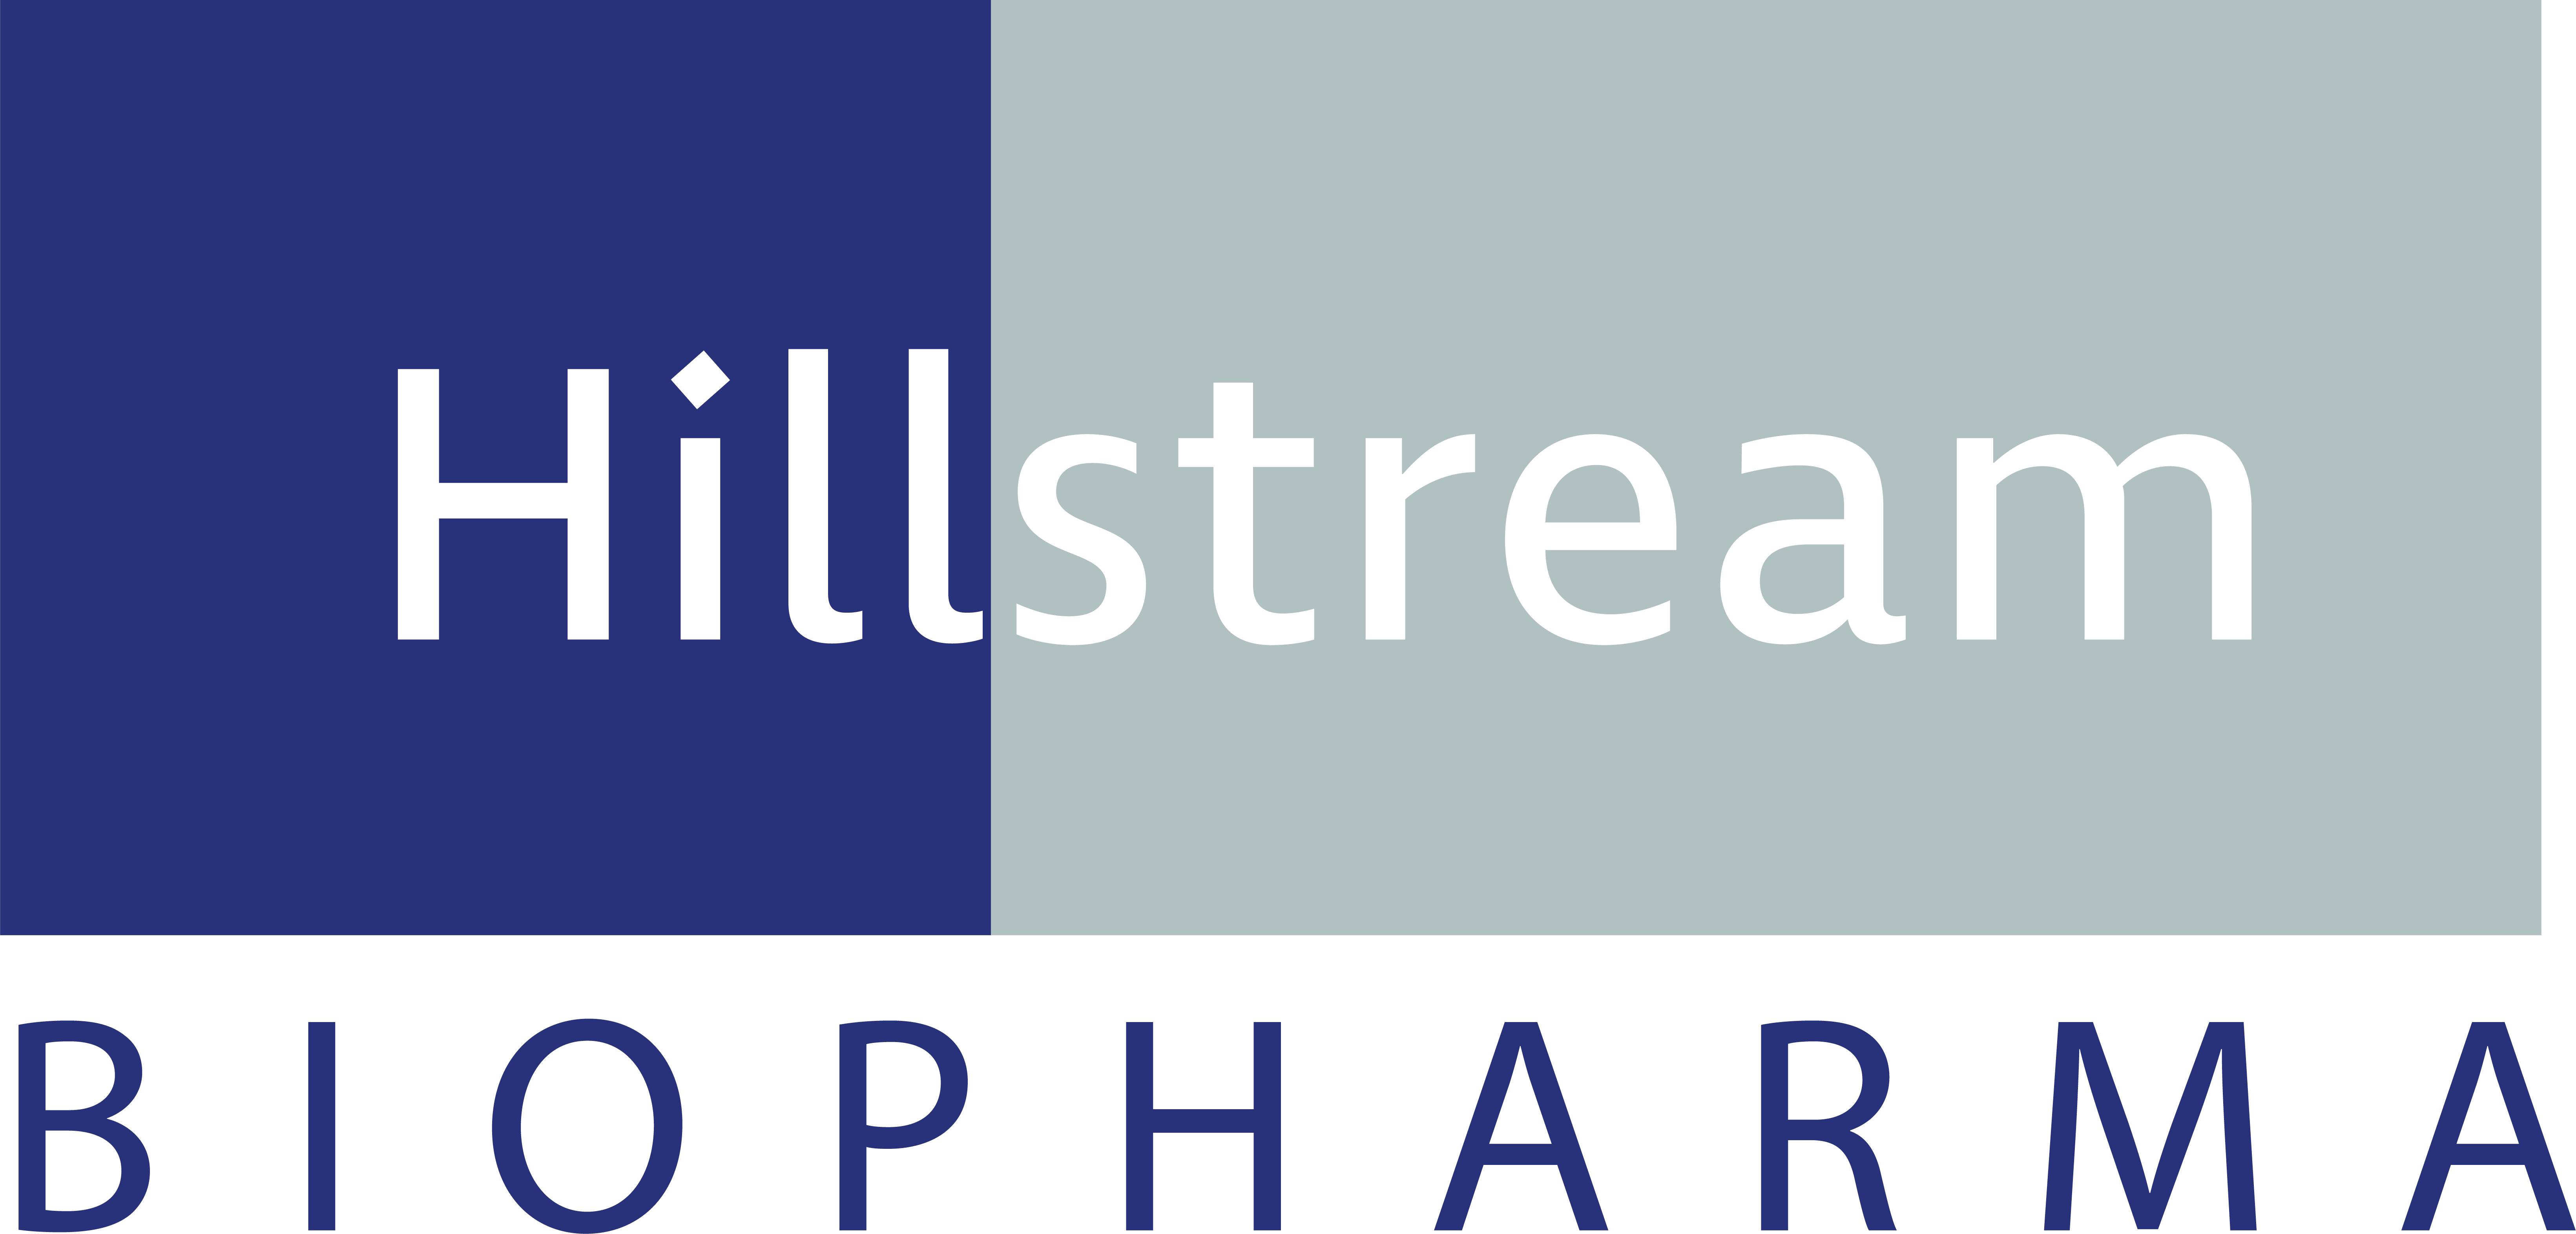 Hillstream BioPharma Announces Pharmacokinetic Data of HSB-1216 Supportive of its Development Strategy and Pre-clinical Data